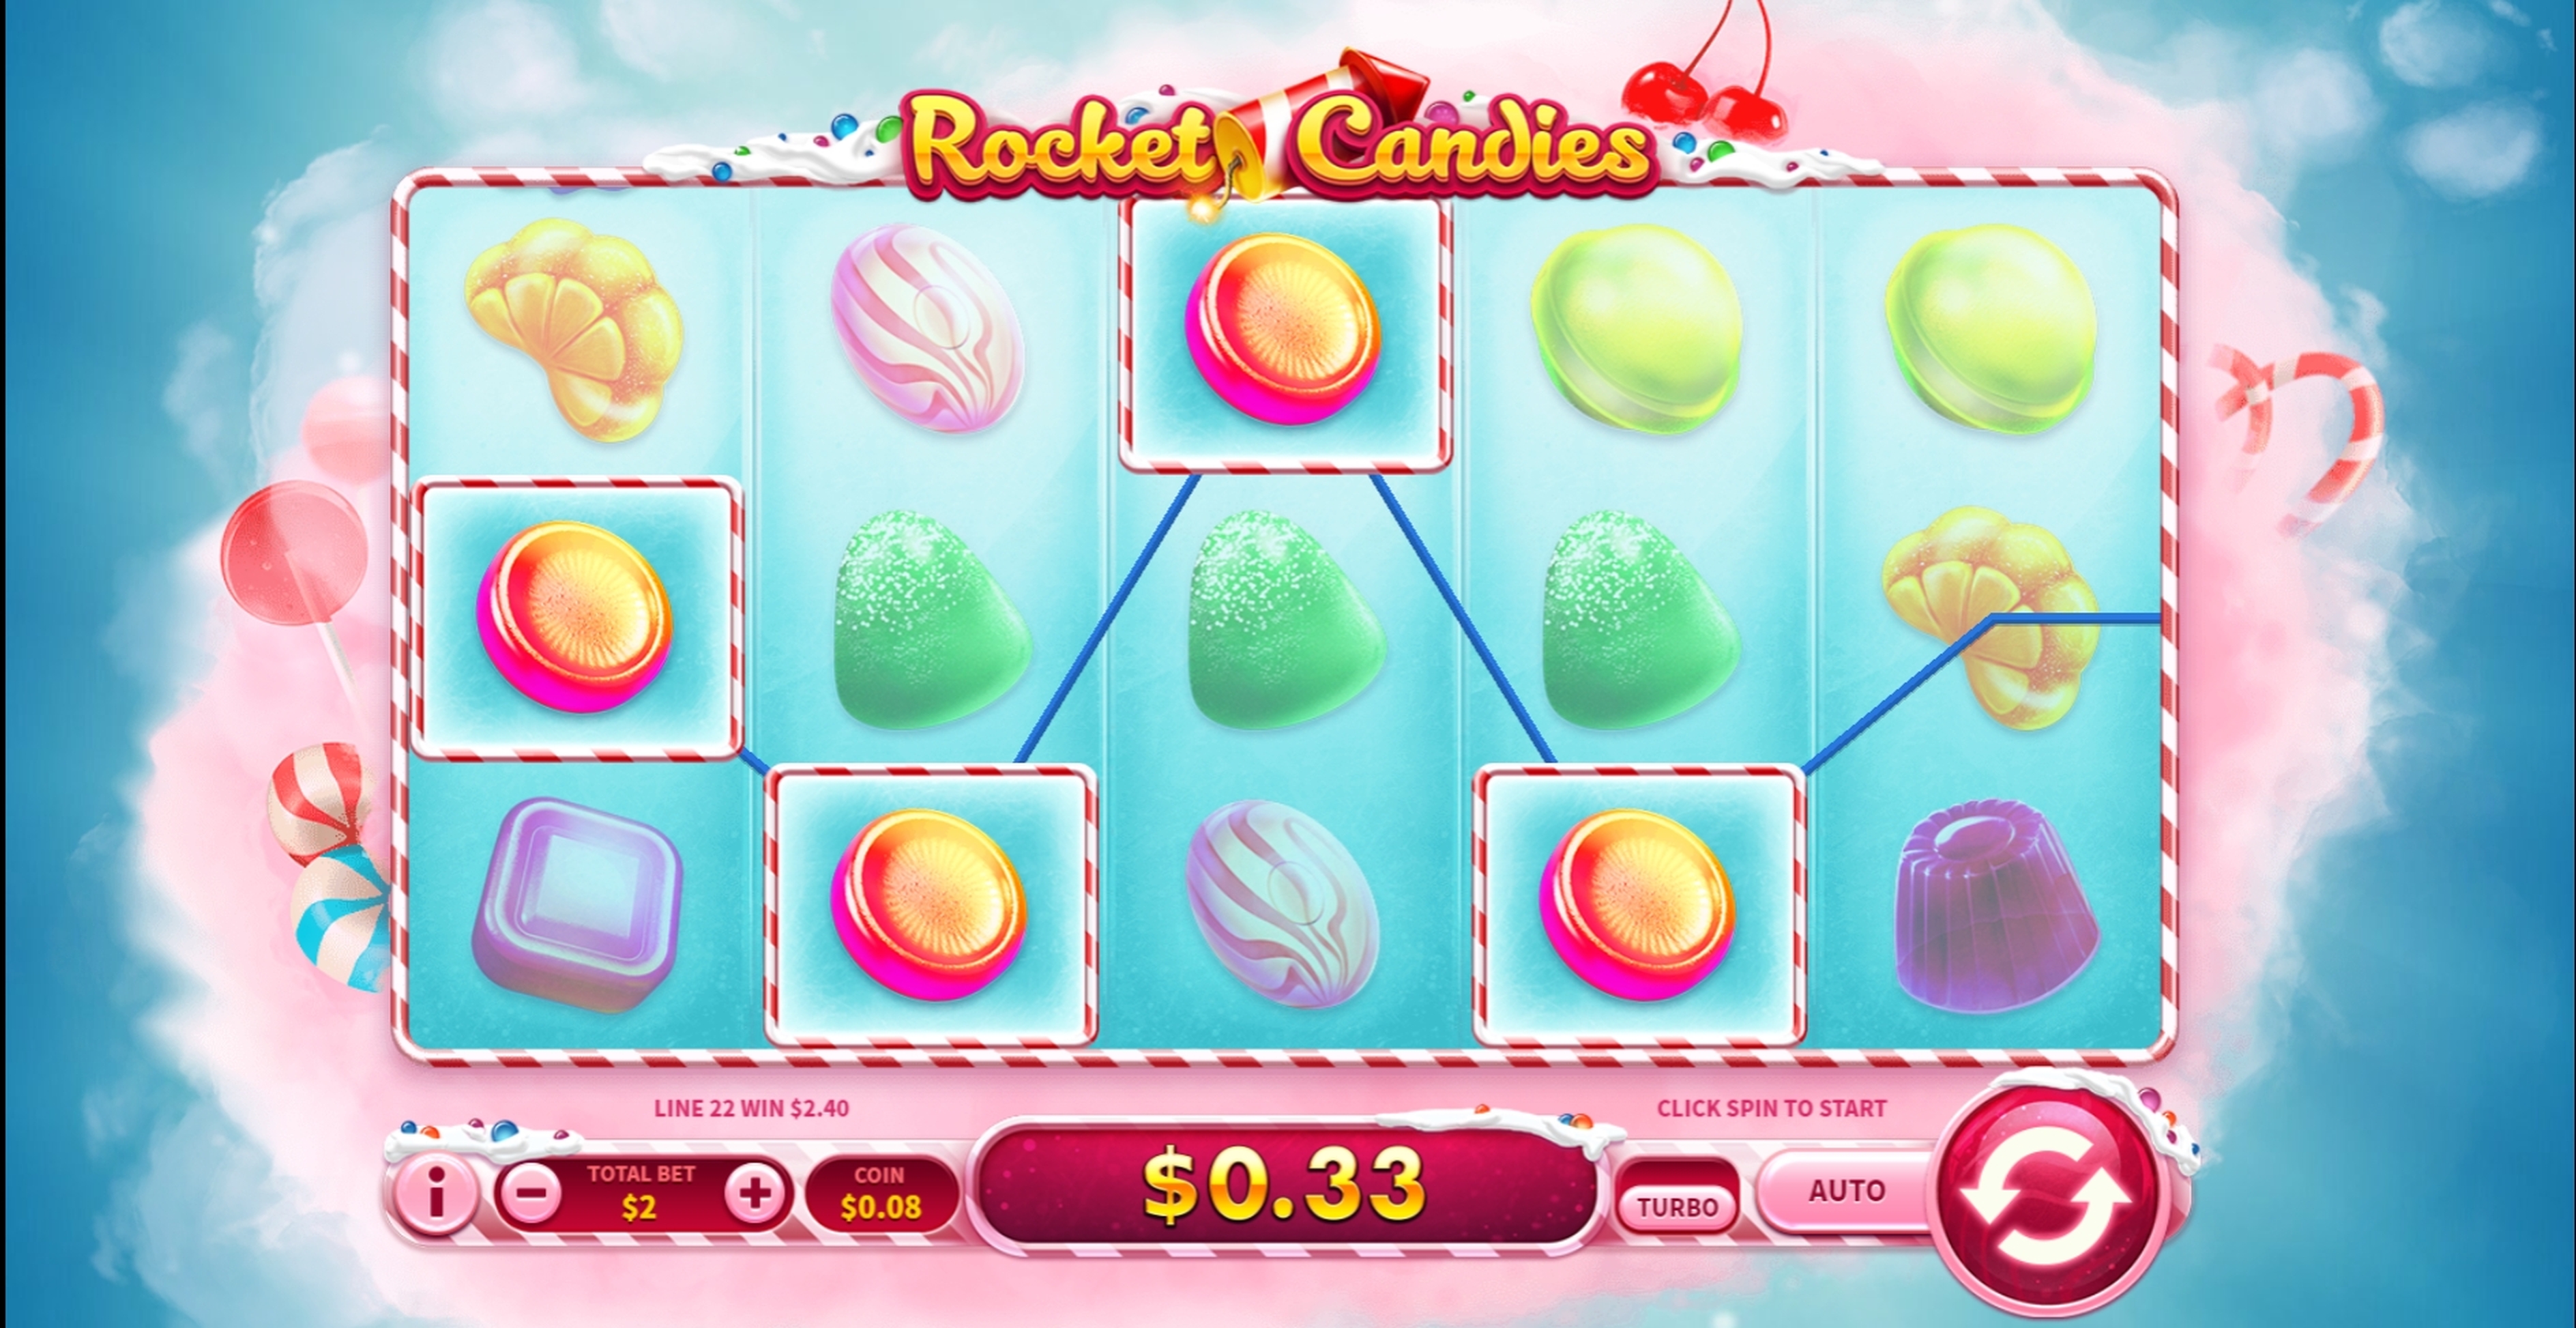 Win Money in Rocket Candies Free Slot Game by Skywind